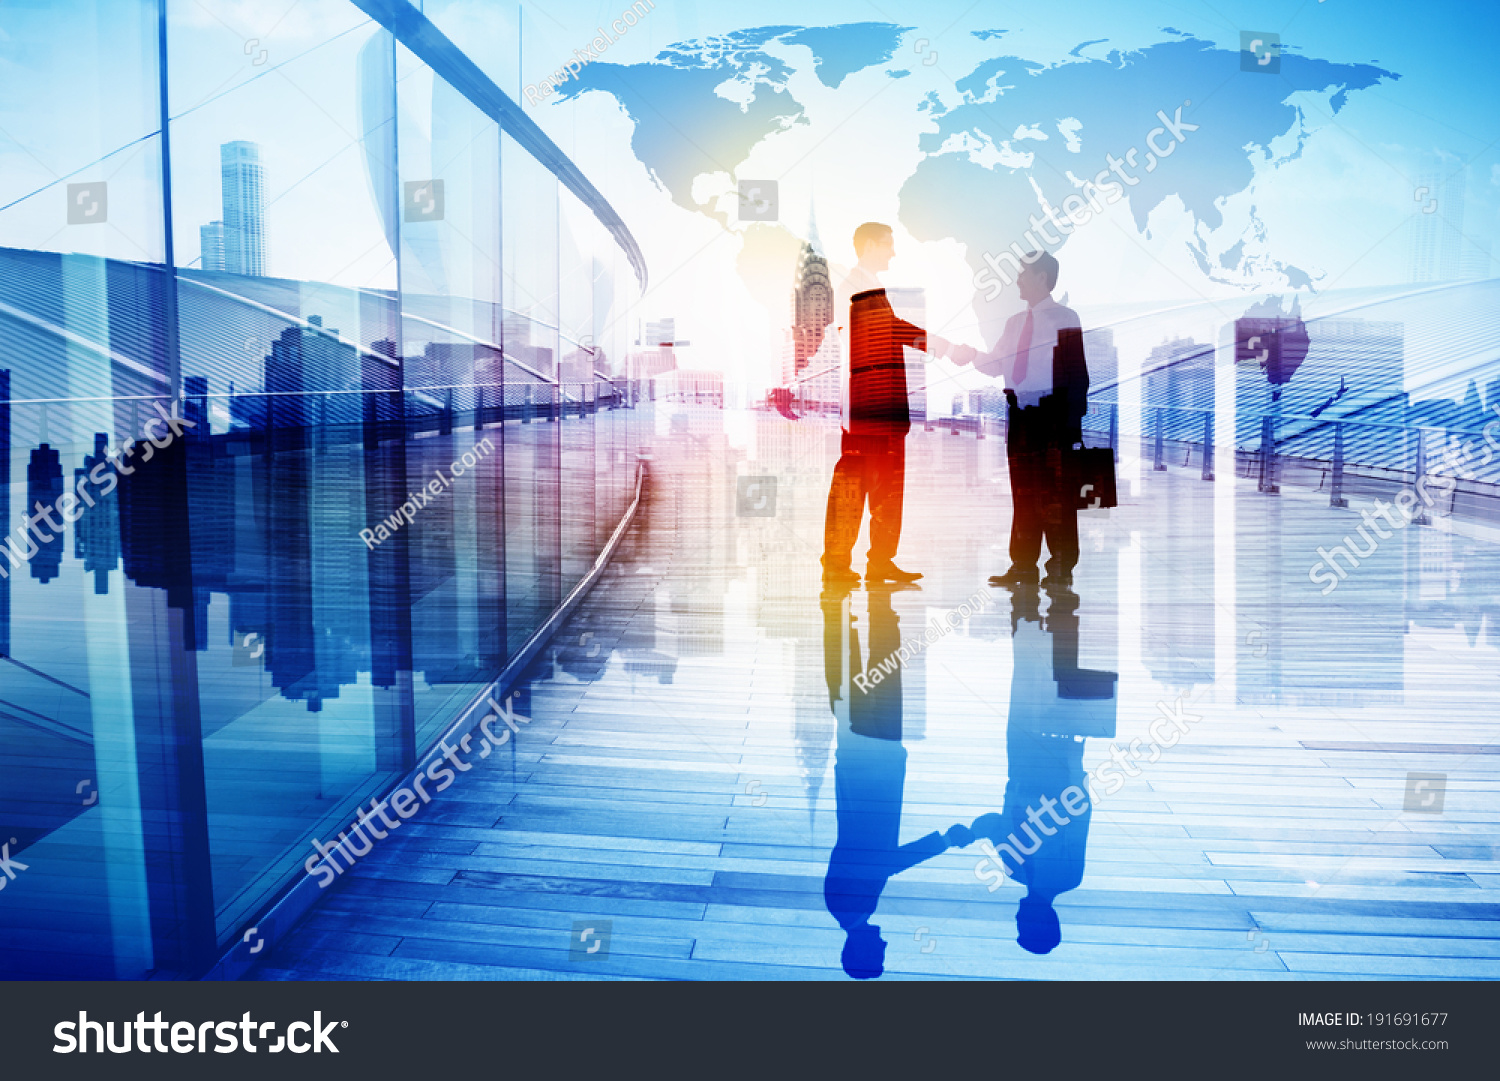 Silhouettes of Two Businessman Shaking Hands #191691677